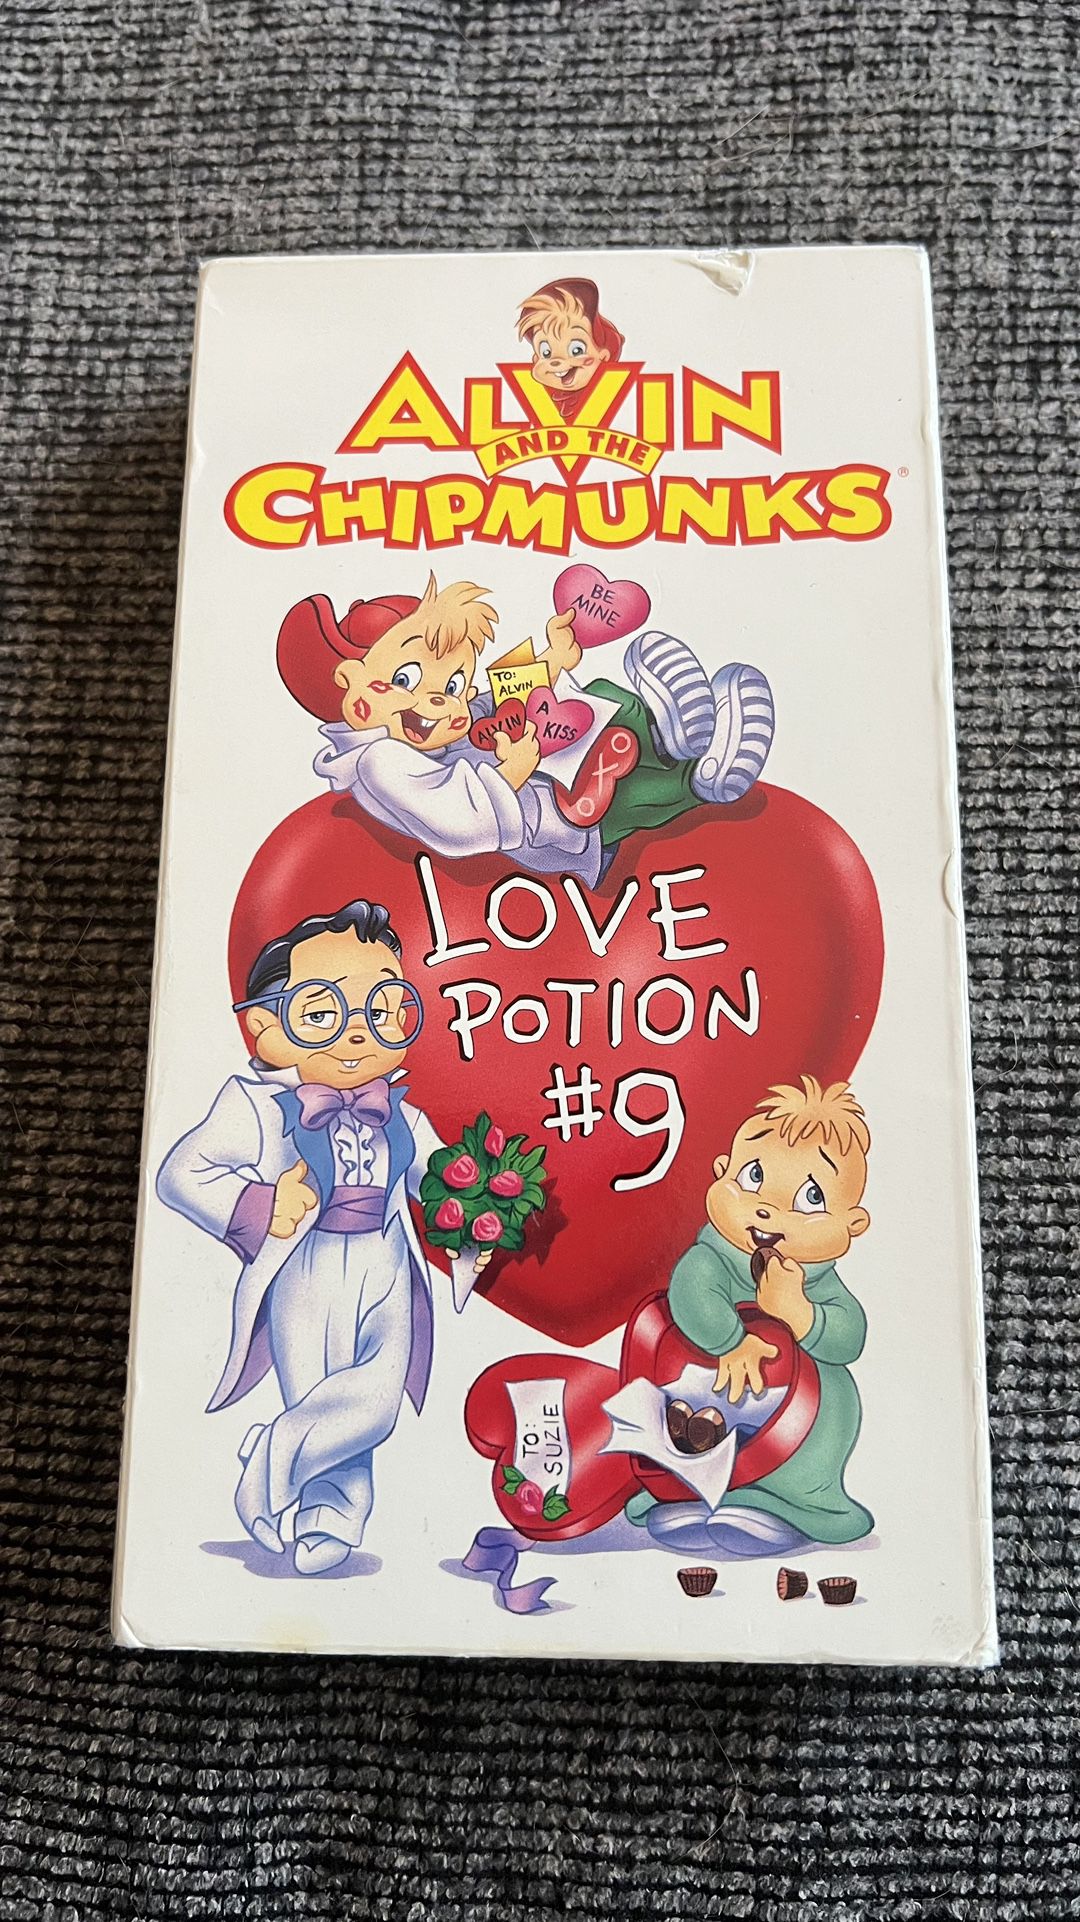 Alvin And The Chipmunks Lesbian Porn Comics - Vhs - Buena Vista ( Alvin And The Chipmunks - Love Potion #9 ) for Sale in  North Las Vegas, NV - OfferUp